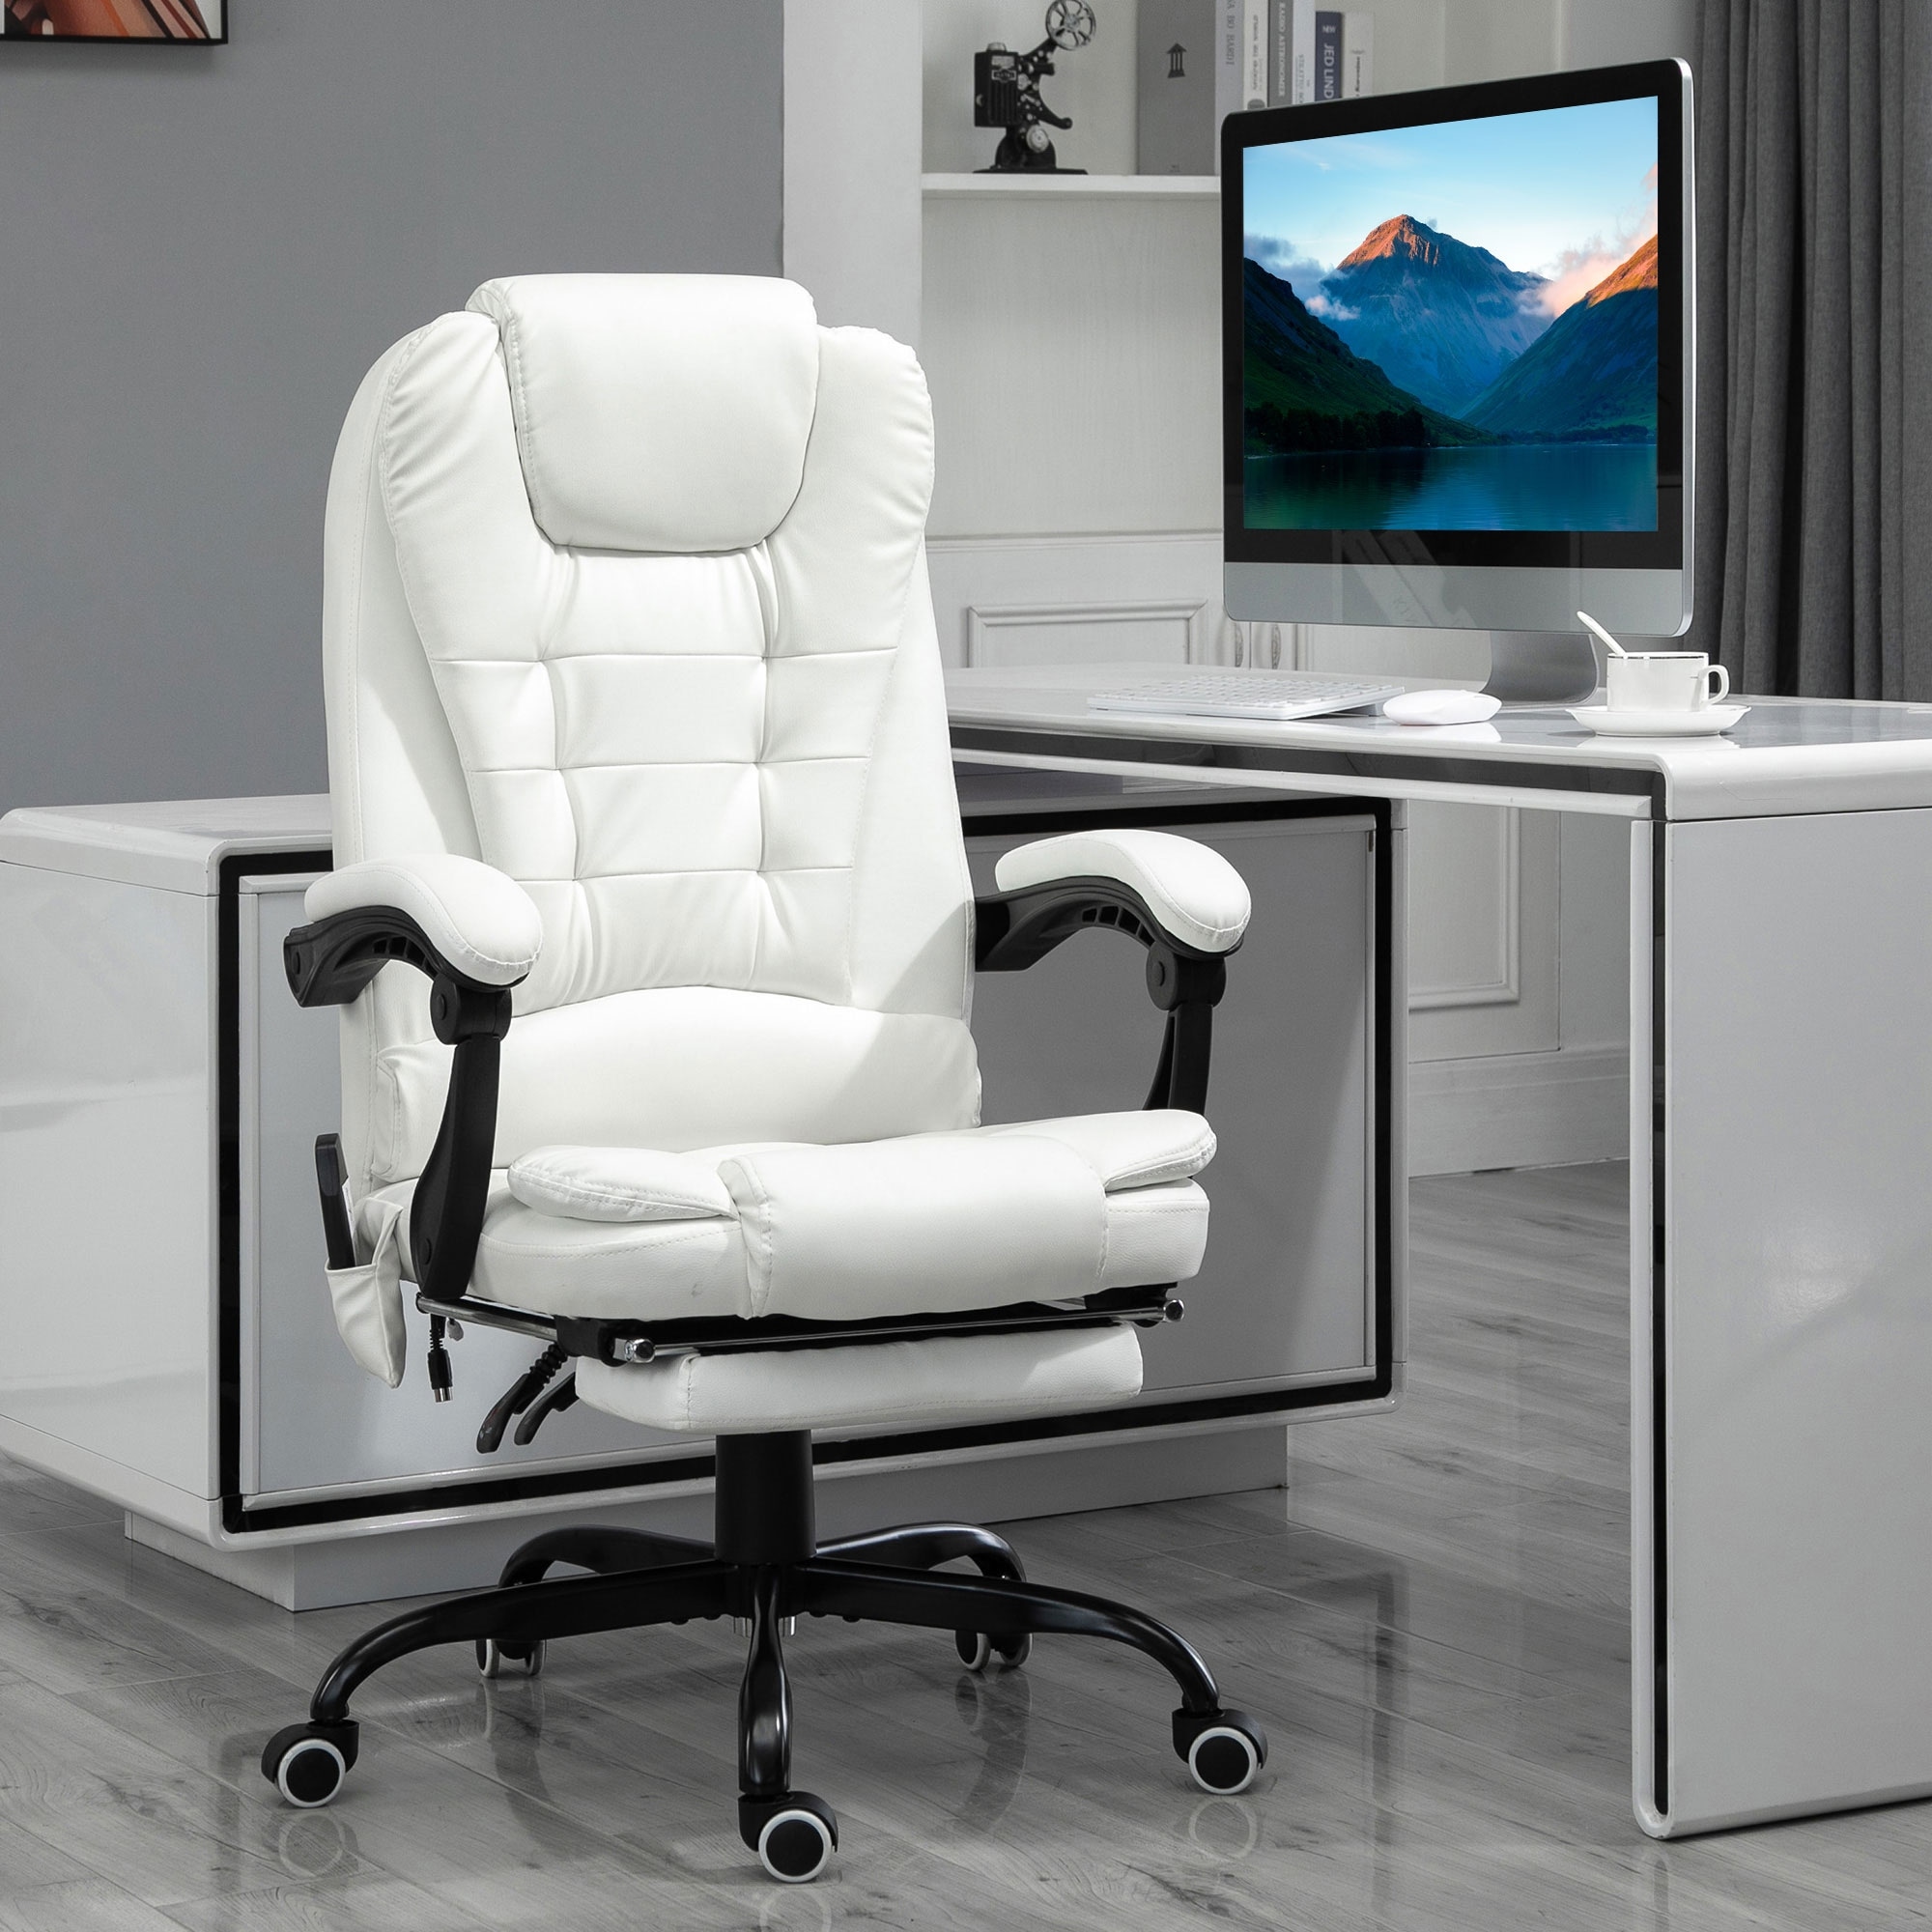 Vinsetto High-Back Vibration Massaging Office Chair, Reclining Office Chair  with USB Port, Remote Control and Footrest - On Sale - Bed Bath & Beyond -  36742161